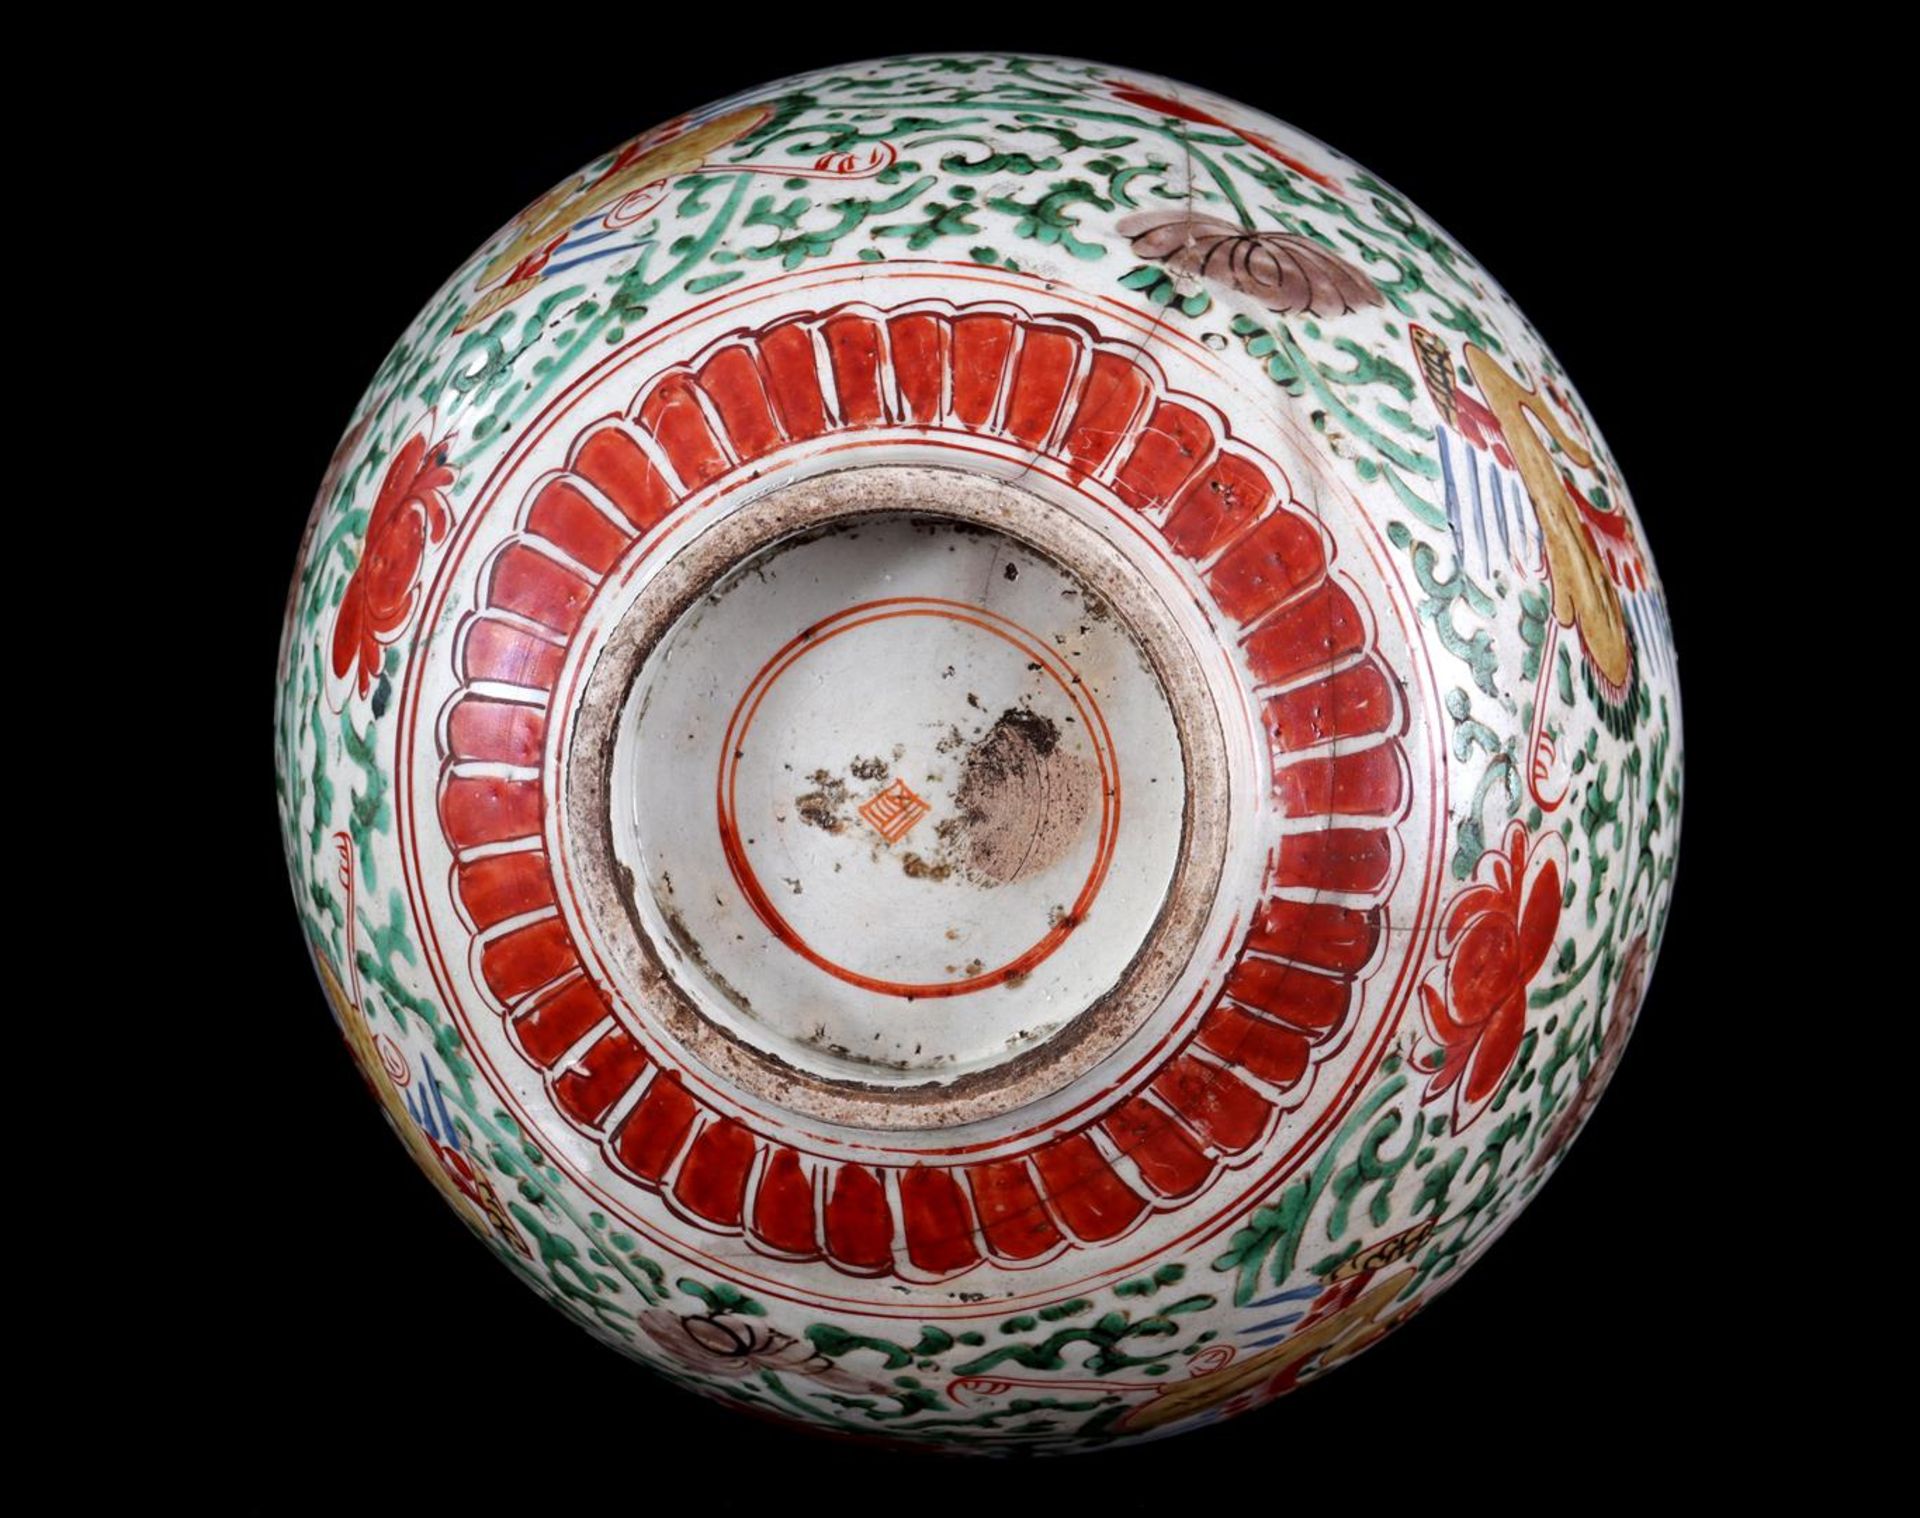 Porcelain polychrome Swatow bowl - Image 3 of 4